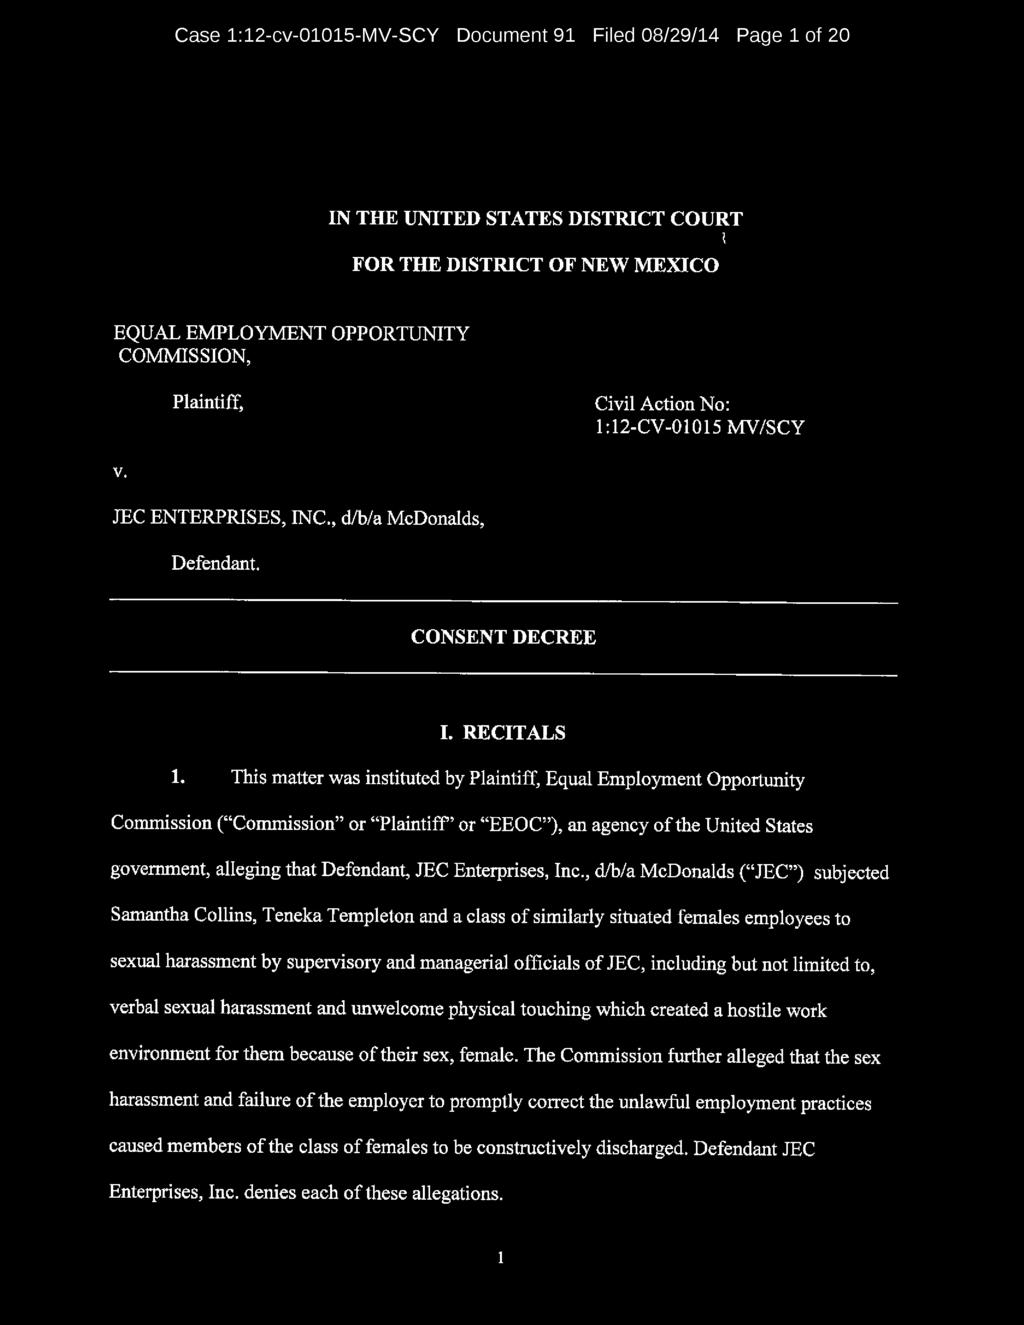 Case 1:12-cv-01015-M V-SC Y Docum ent 91 Filed 08/29/14 Page 1 of 20 IN THE UNITED STATES DISTRICT COURT l FOR THE DISTRICT OF NEW MEXICO EQUAL EMPLOYMENT OPPORTUNITY COMMISSION, Plaintiff, Civil